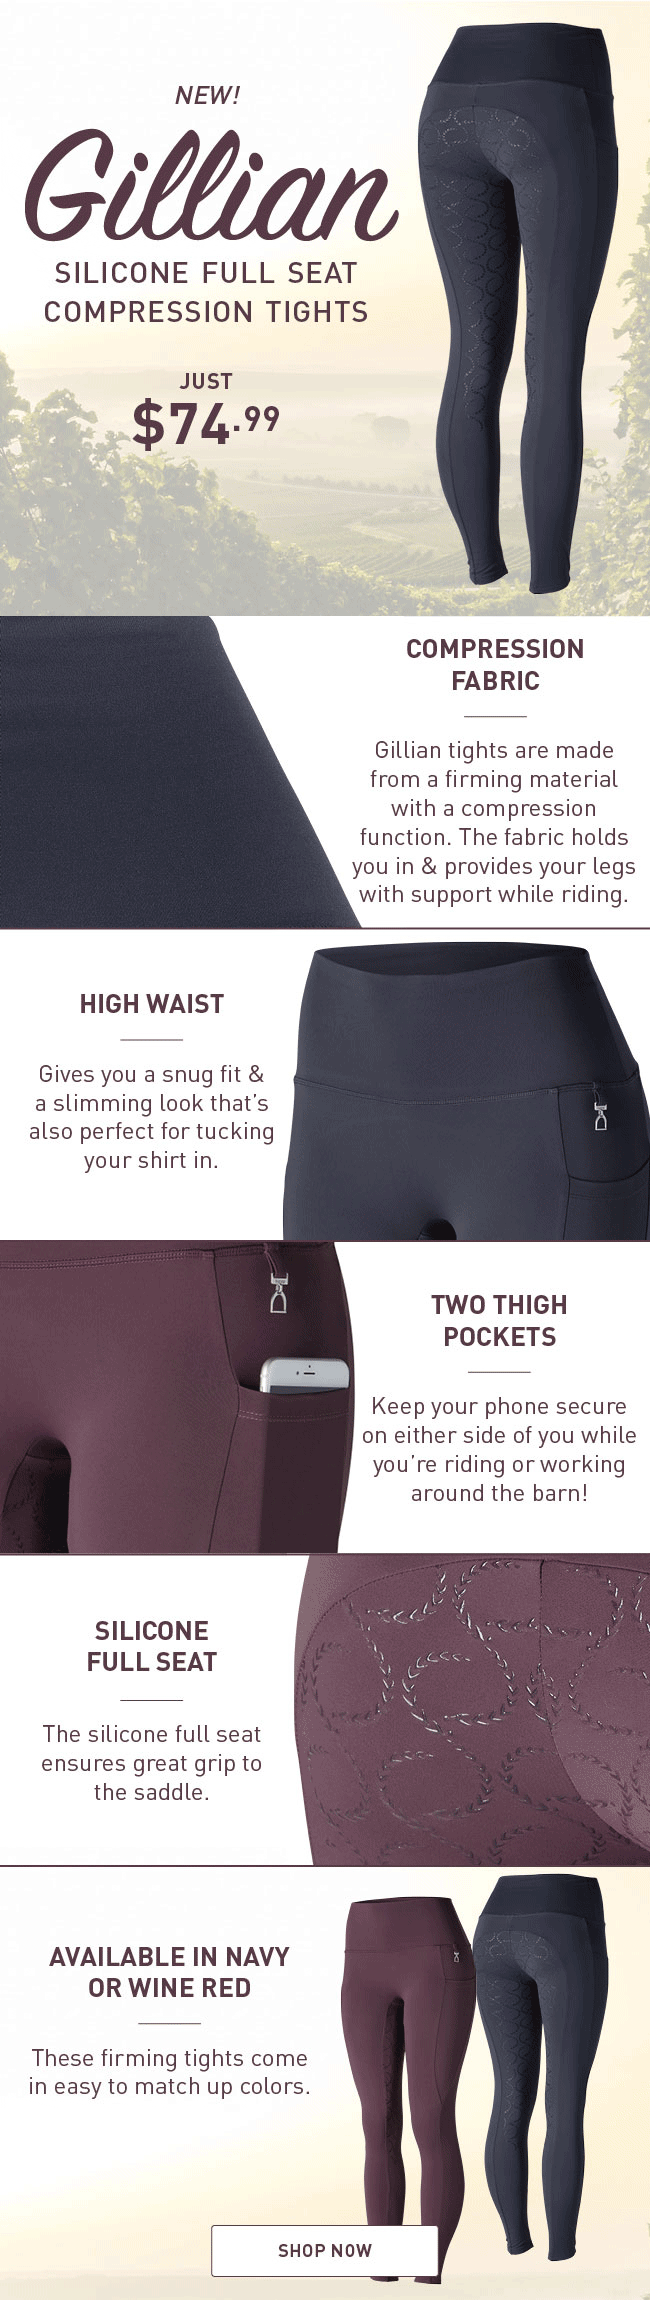 Horze Equestrian: NEW Gillian Compression Tights are a must-have for your  riding wardrobe!